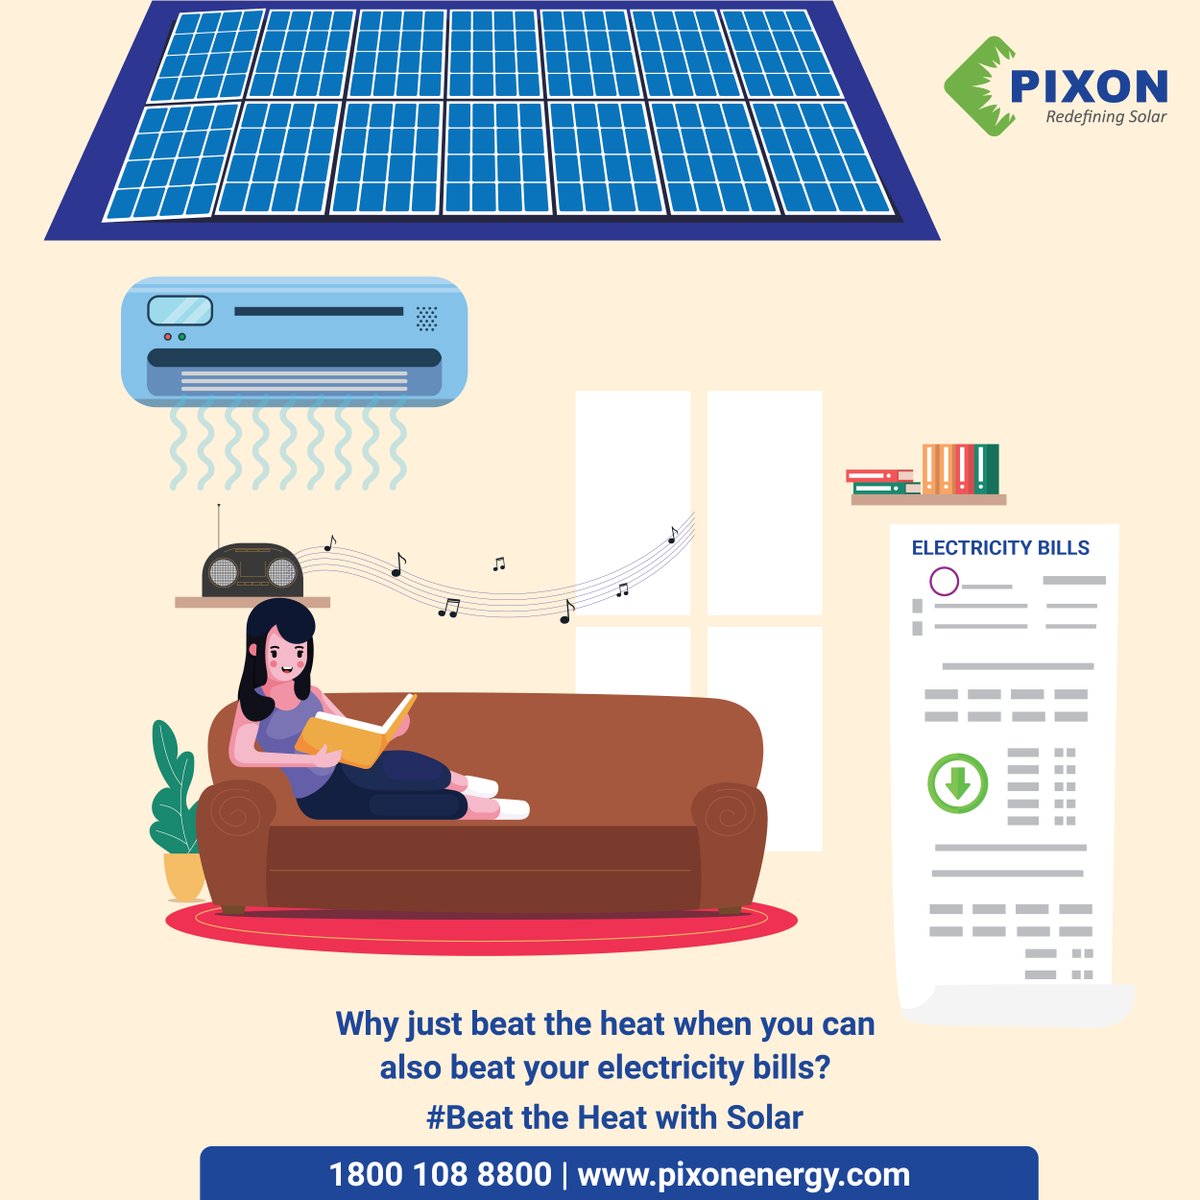 Turn up the cool and turn down the costs! 
Dive into solar this summer and watch your energy bills plummet.

#pixonenergy #electricitybills #solarpower #renewableenergy #solarpanels #solarenergy #summer #energybills #electricity